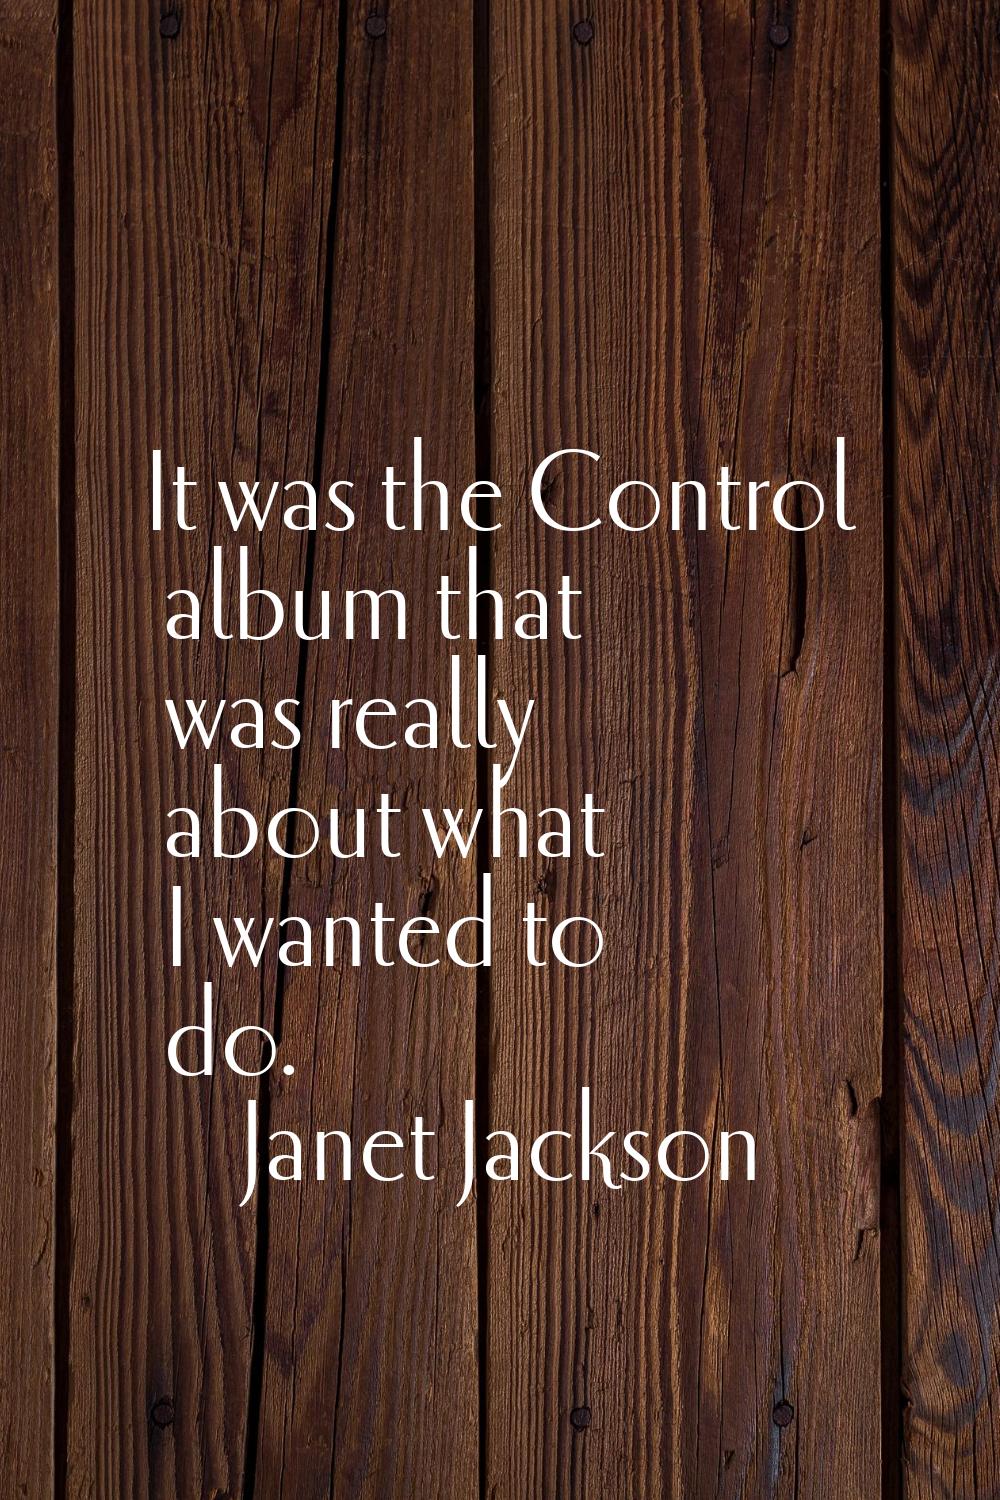 It was the Control album that was really about what I wanted to do.